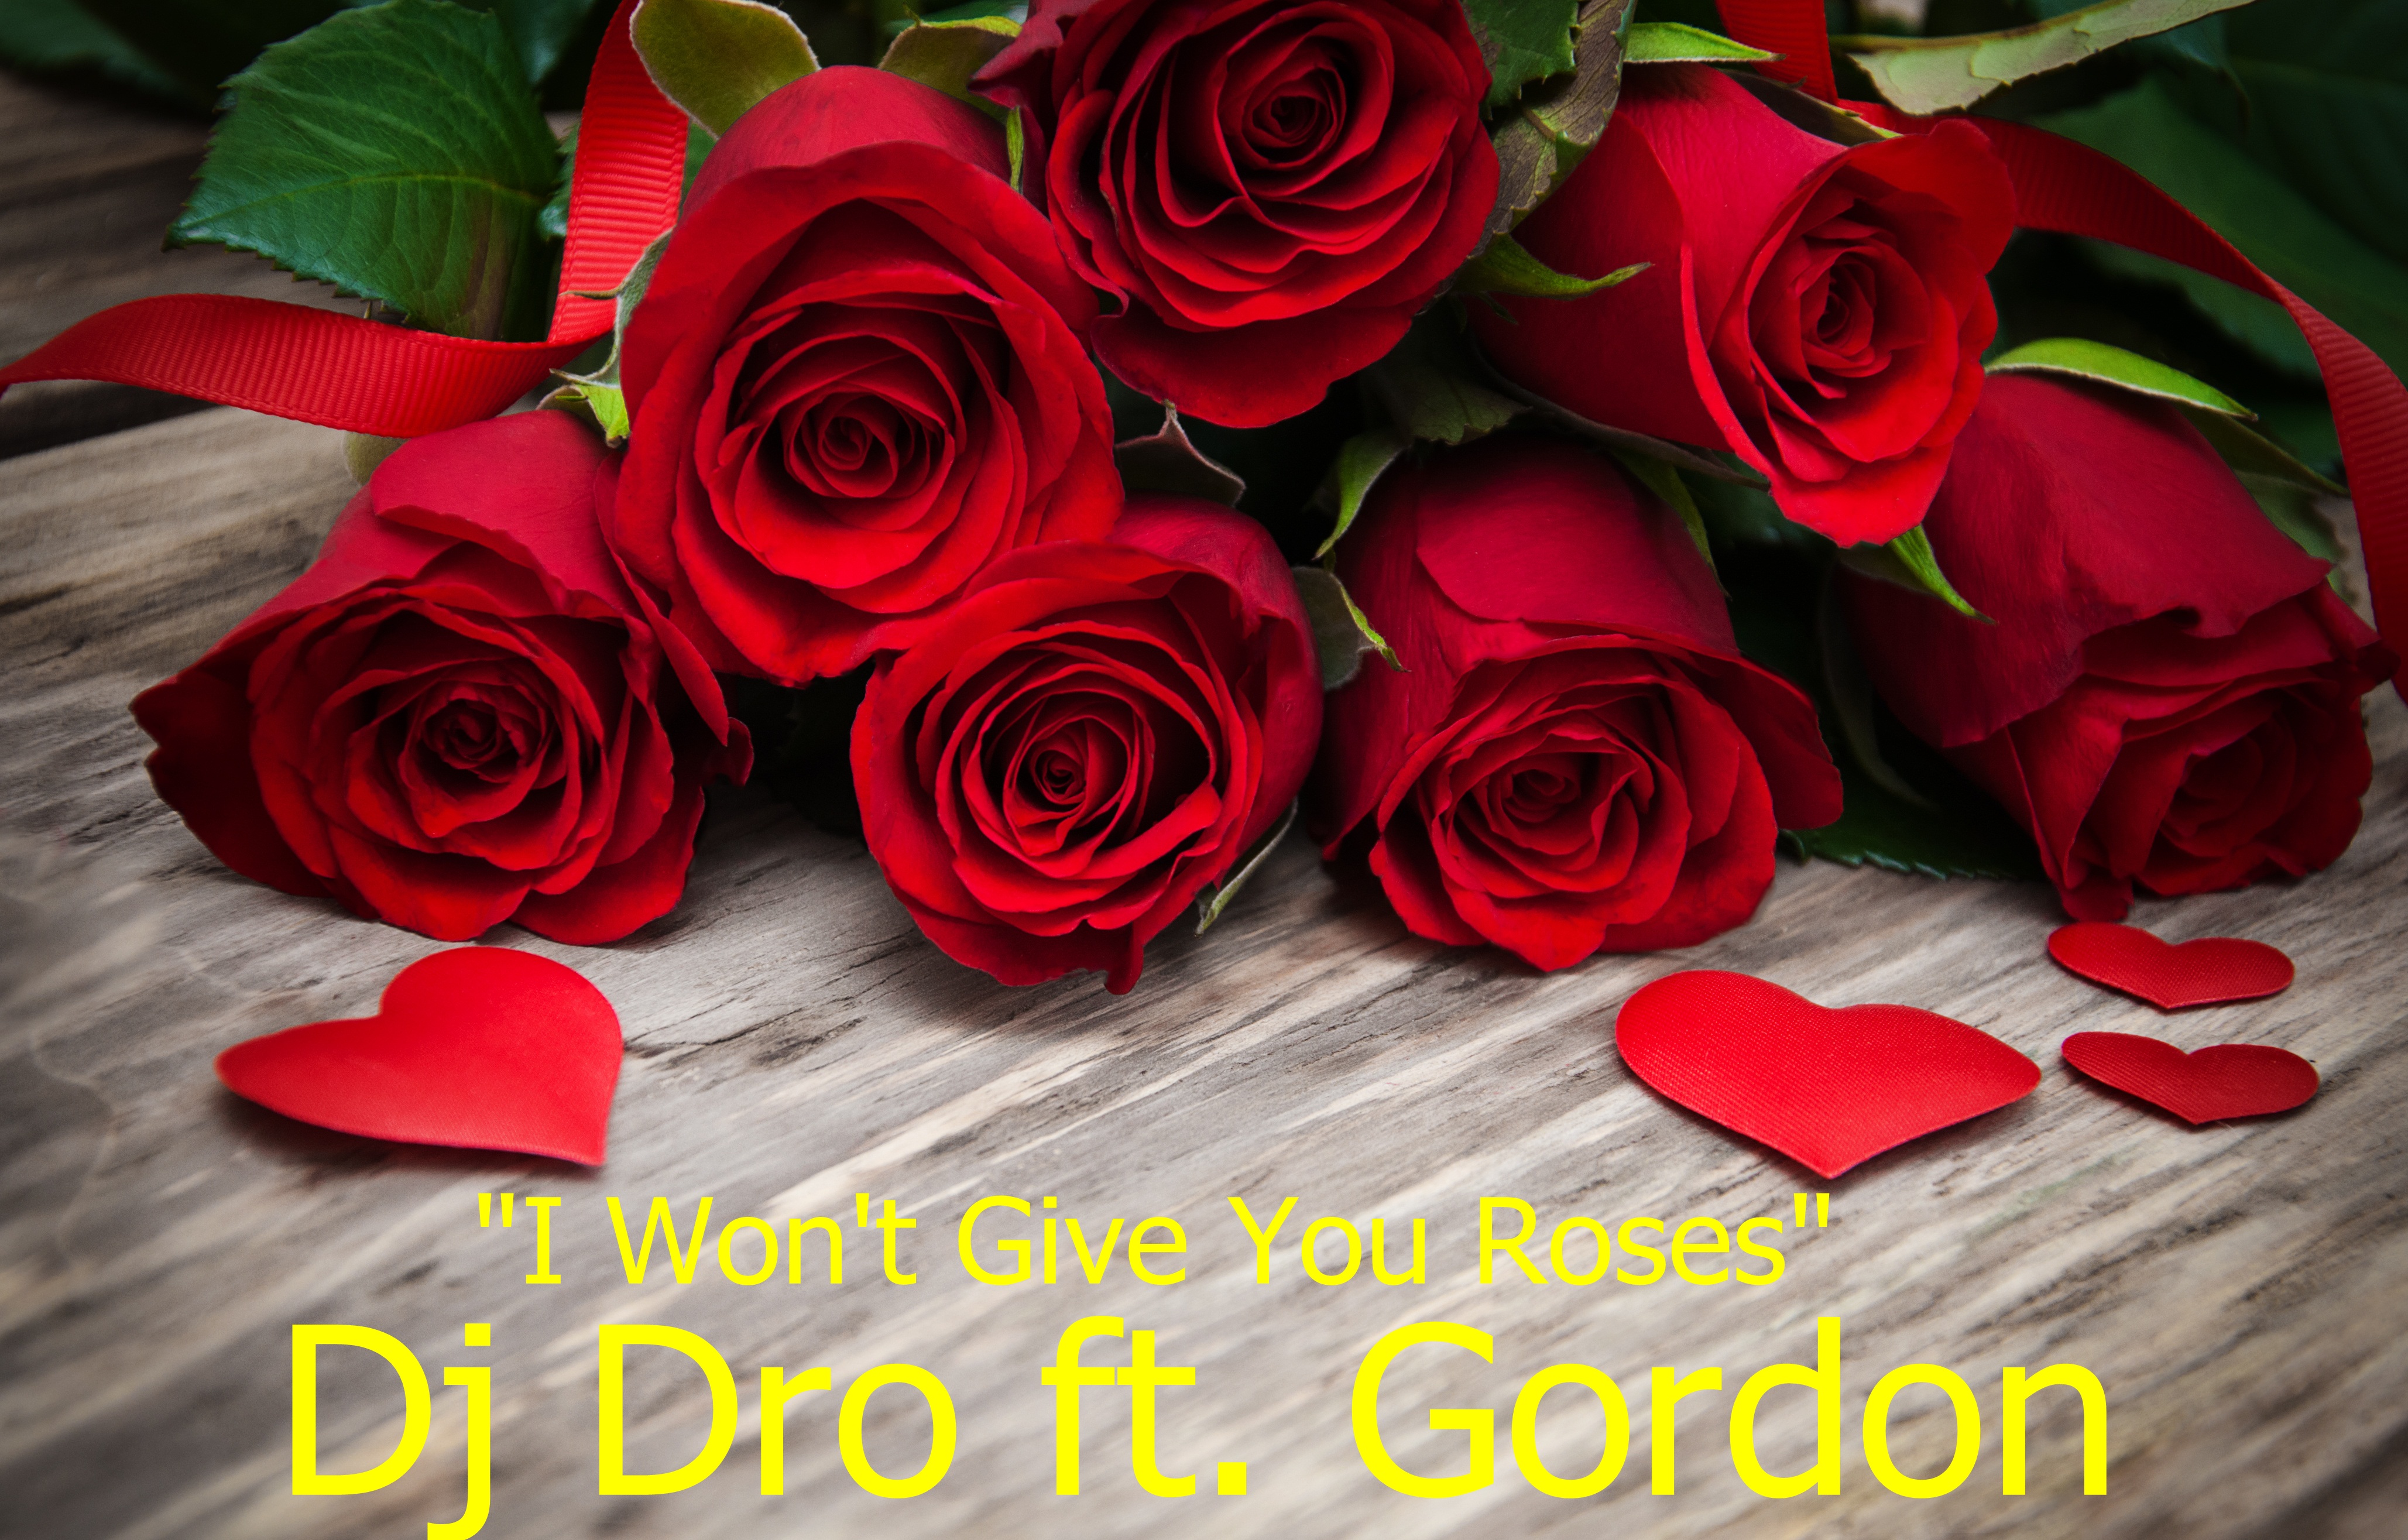 I wont give you roses